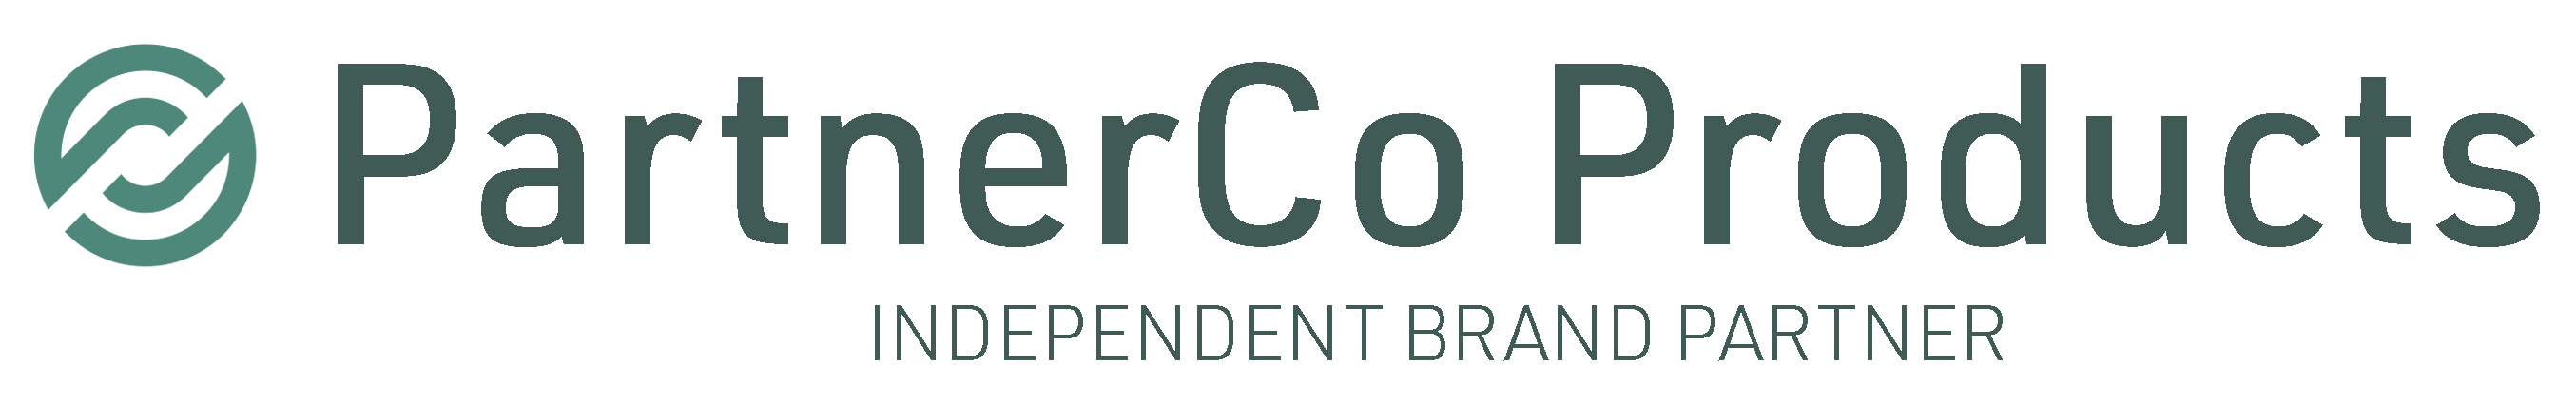 PartnerCo Products